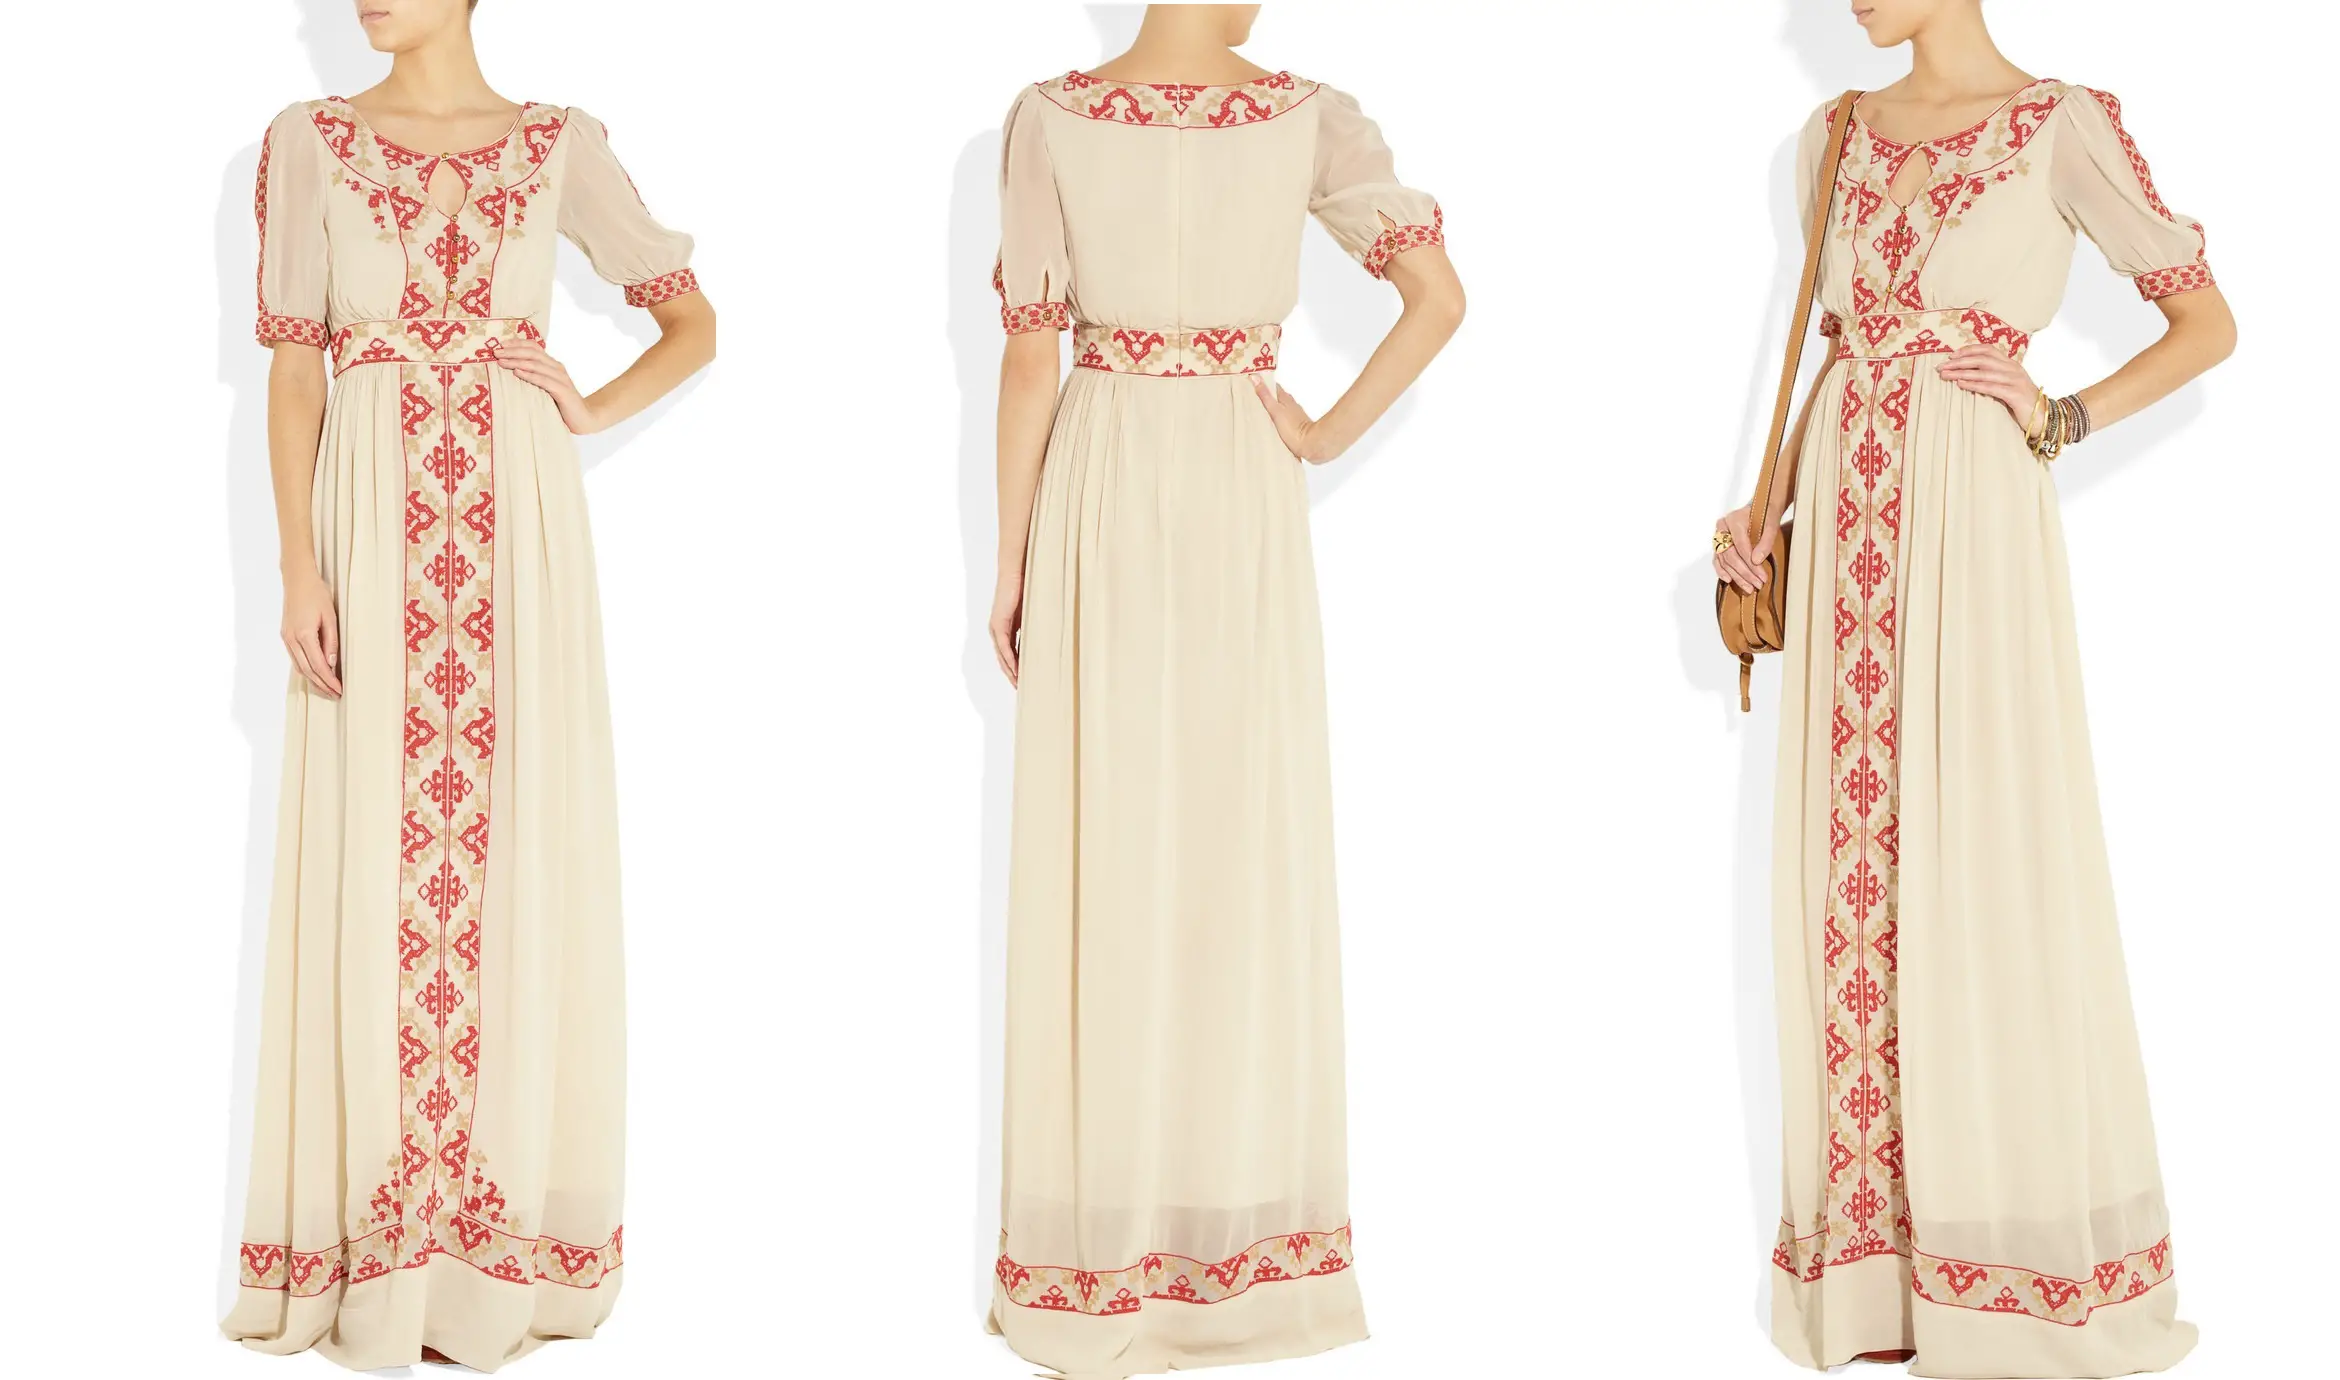  Alice by Temperly Beatrice Embroidered Crepe Maxi Dress